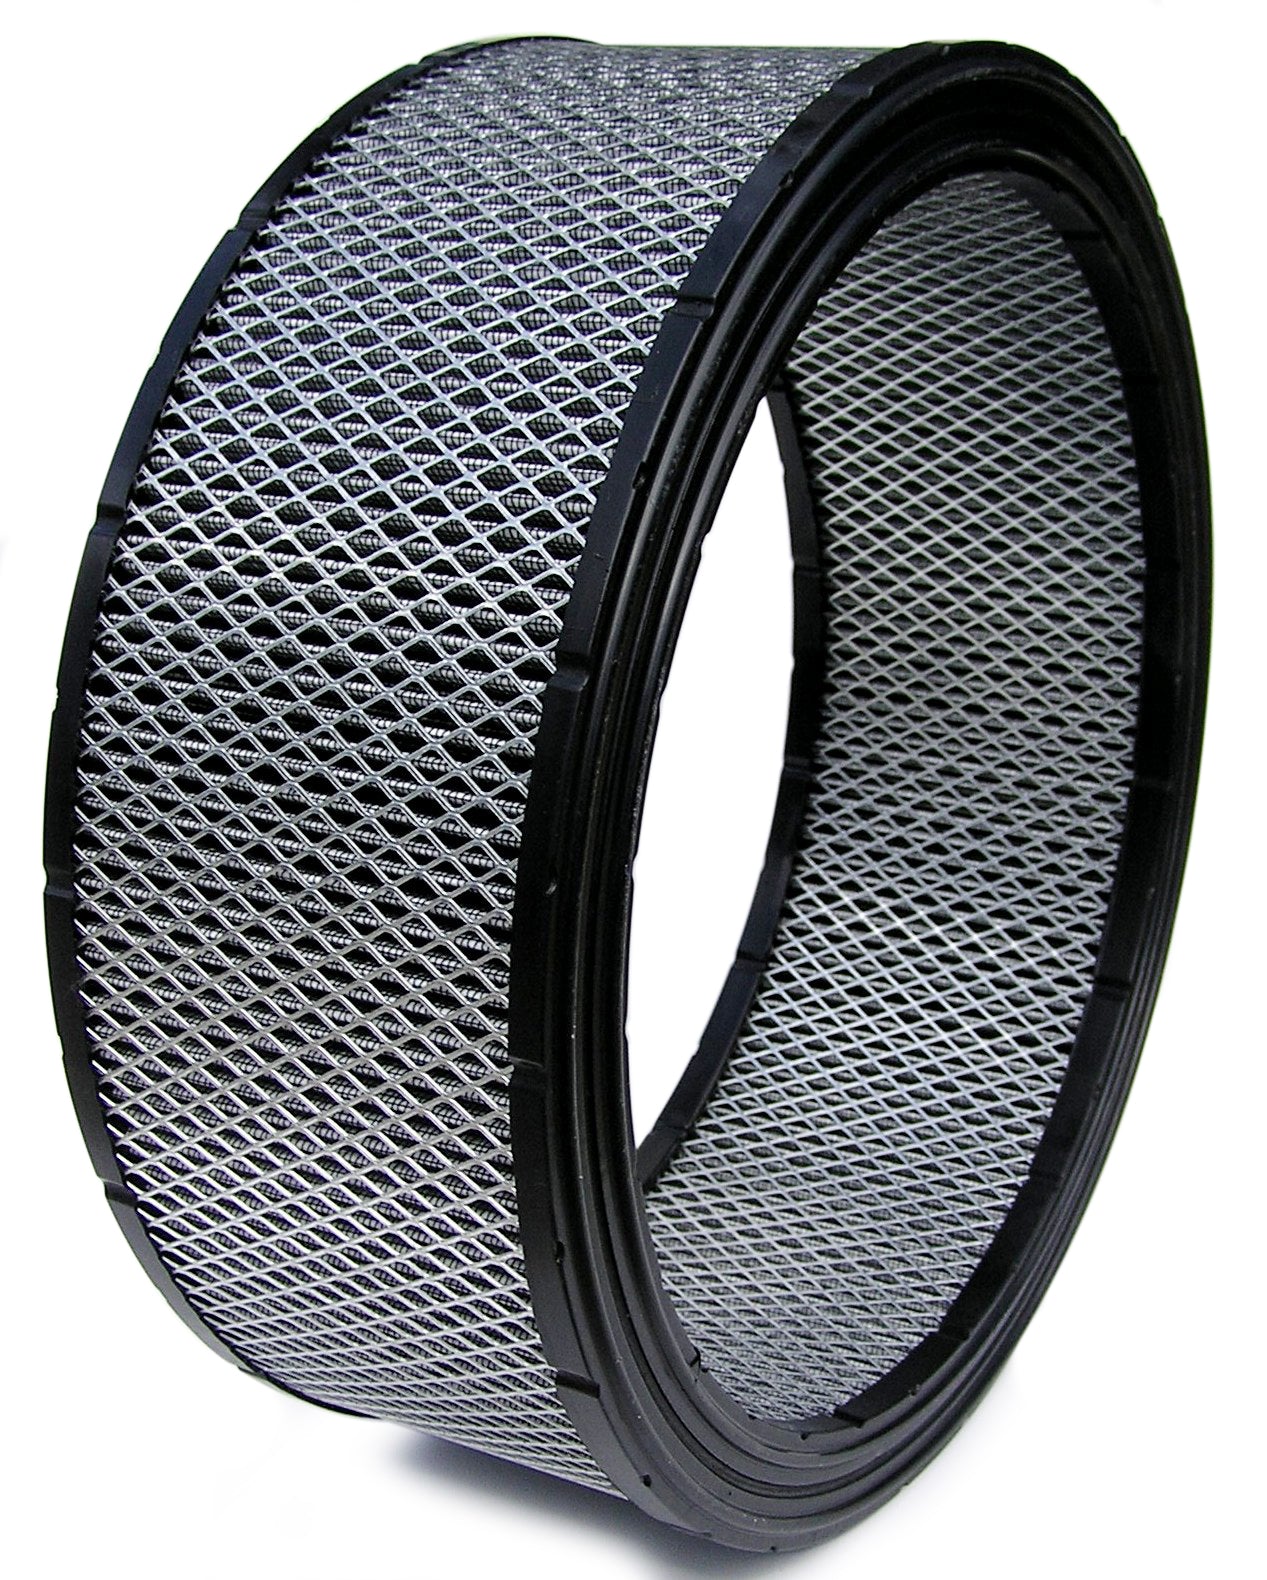 Spyder Filters Air Filter 14in x 5in Dirt / Off Road SPYSF1450